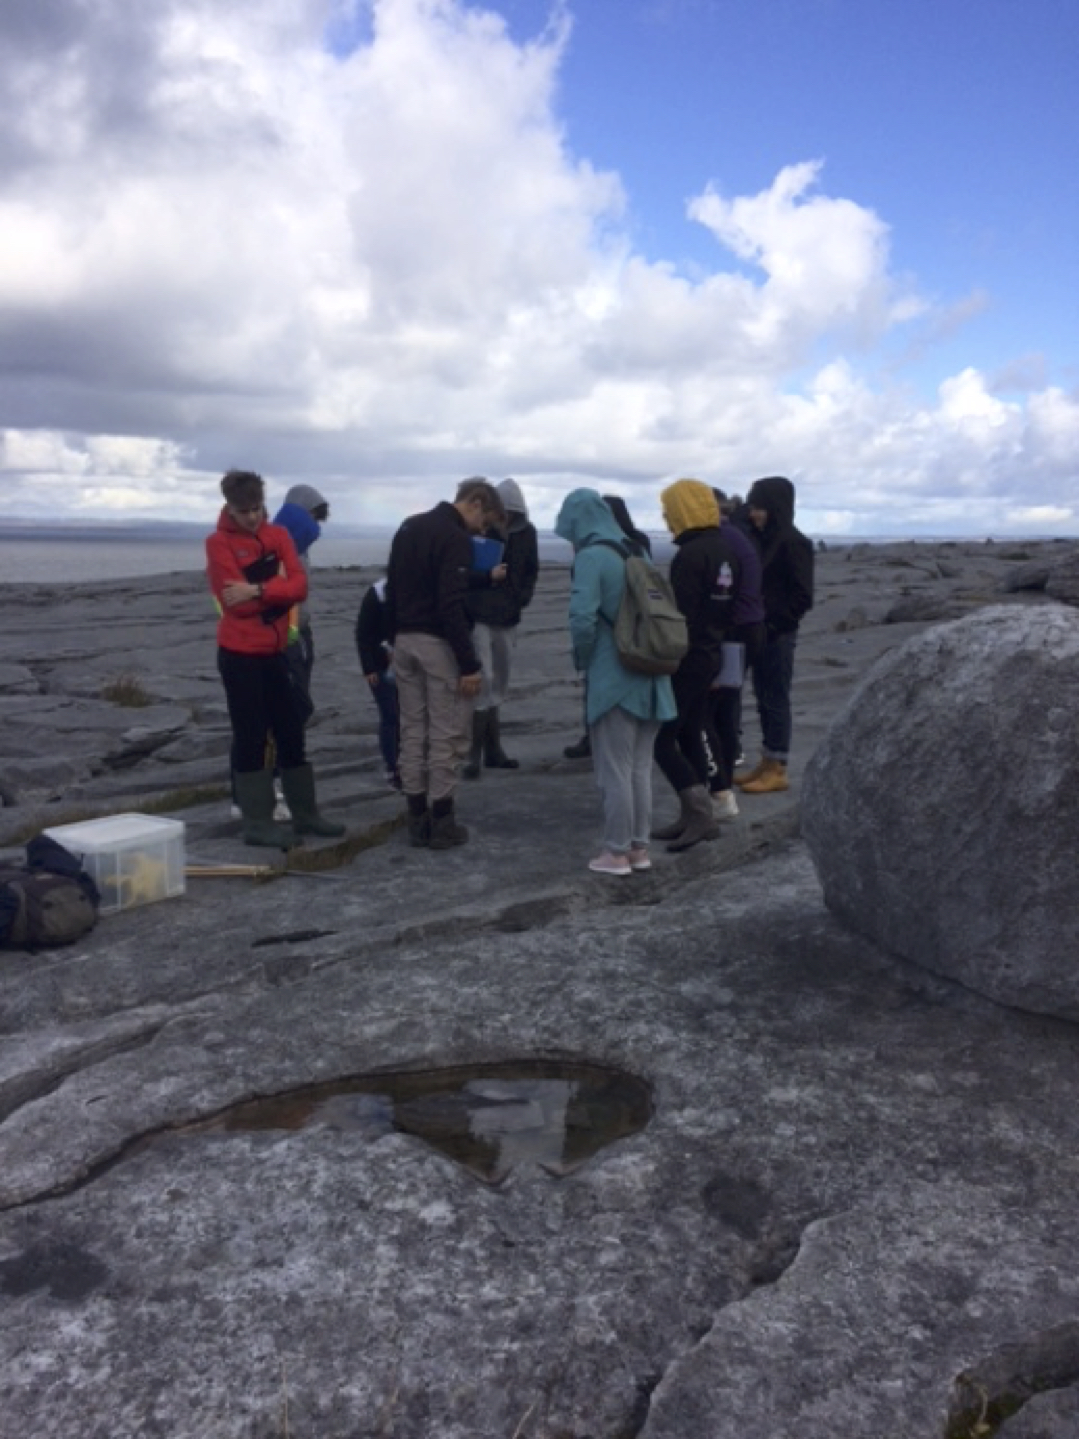 Sept 2017: Desmond College Leaving Certificate Geography students analysing the bedrock in the Burren